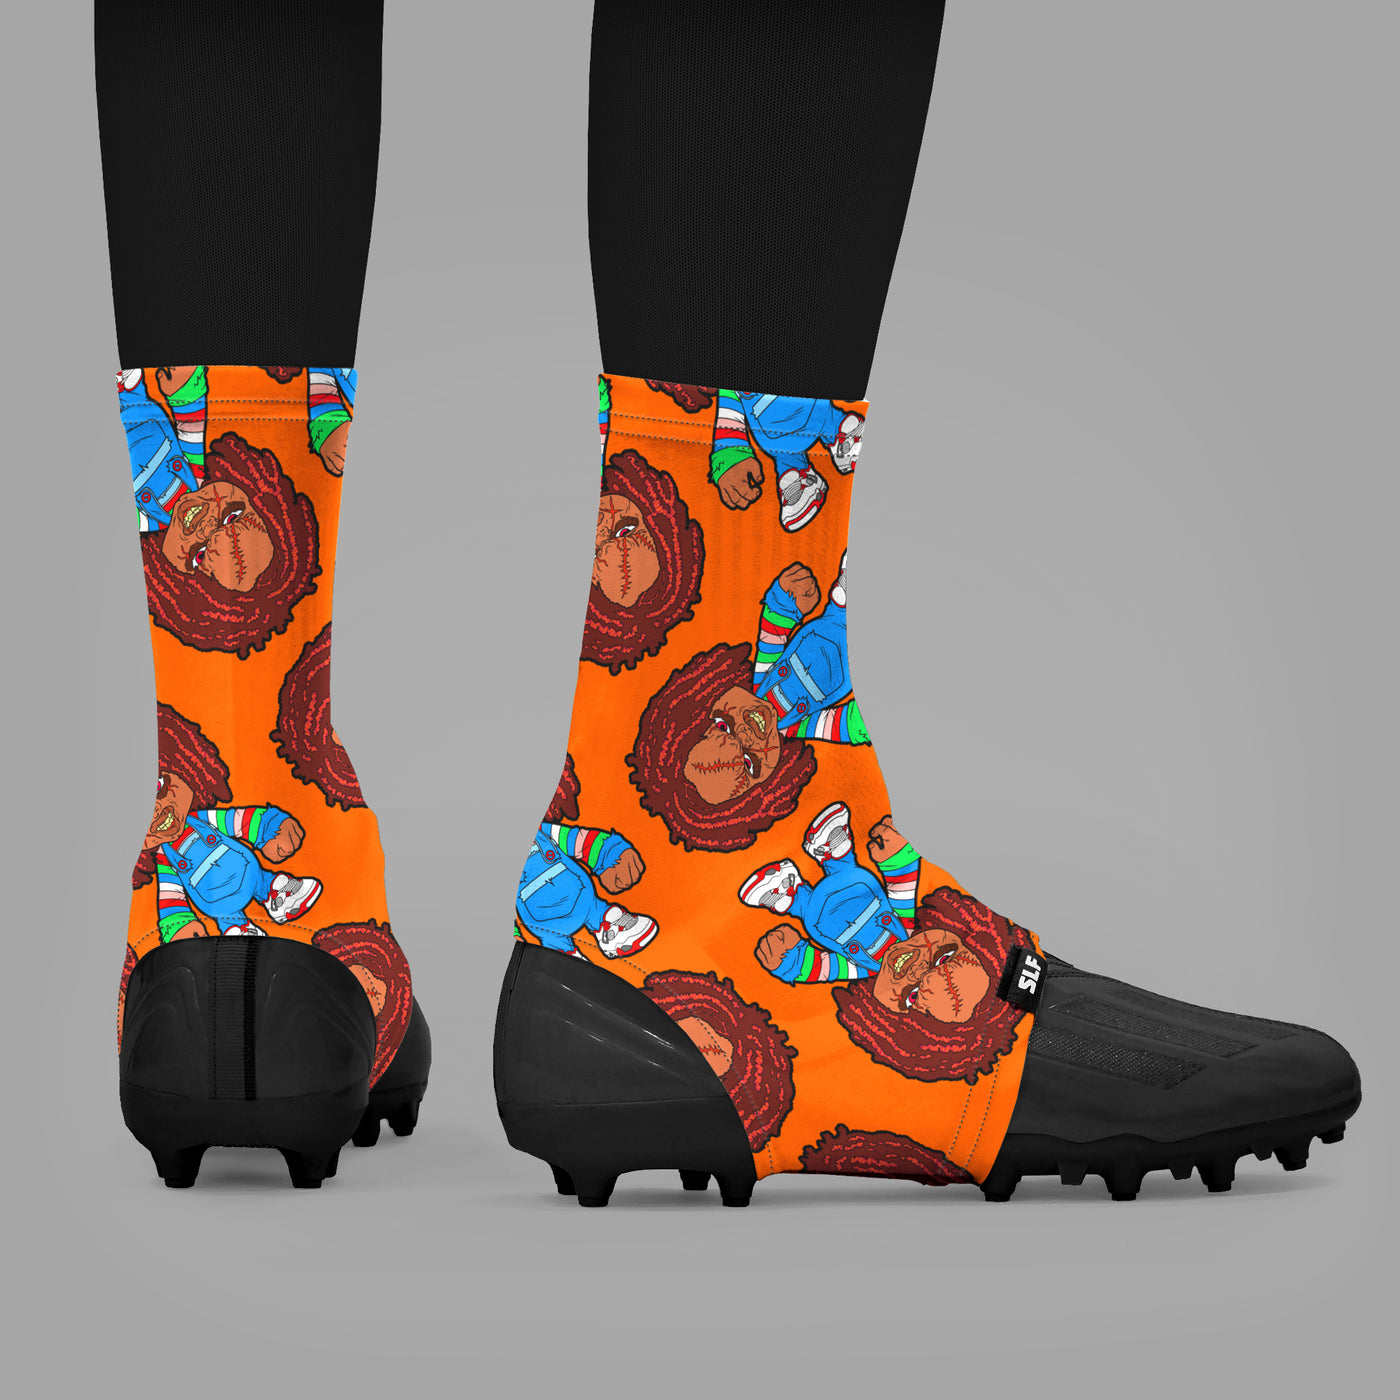 Bad Kid Spats / Cleat Covers